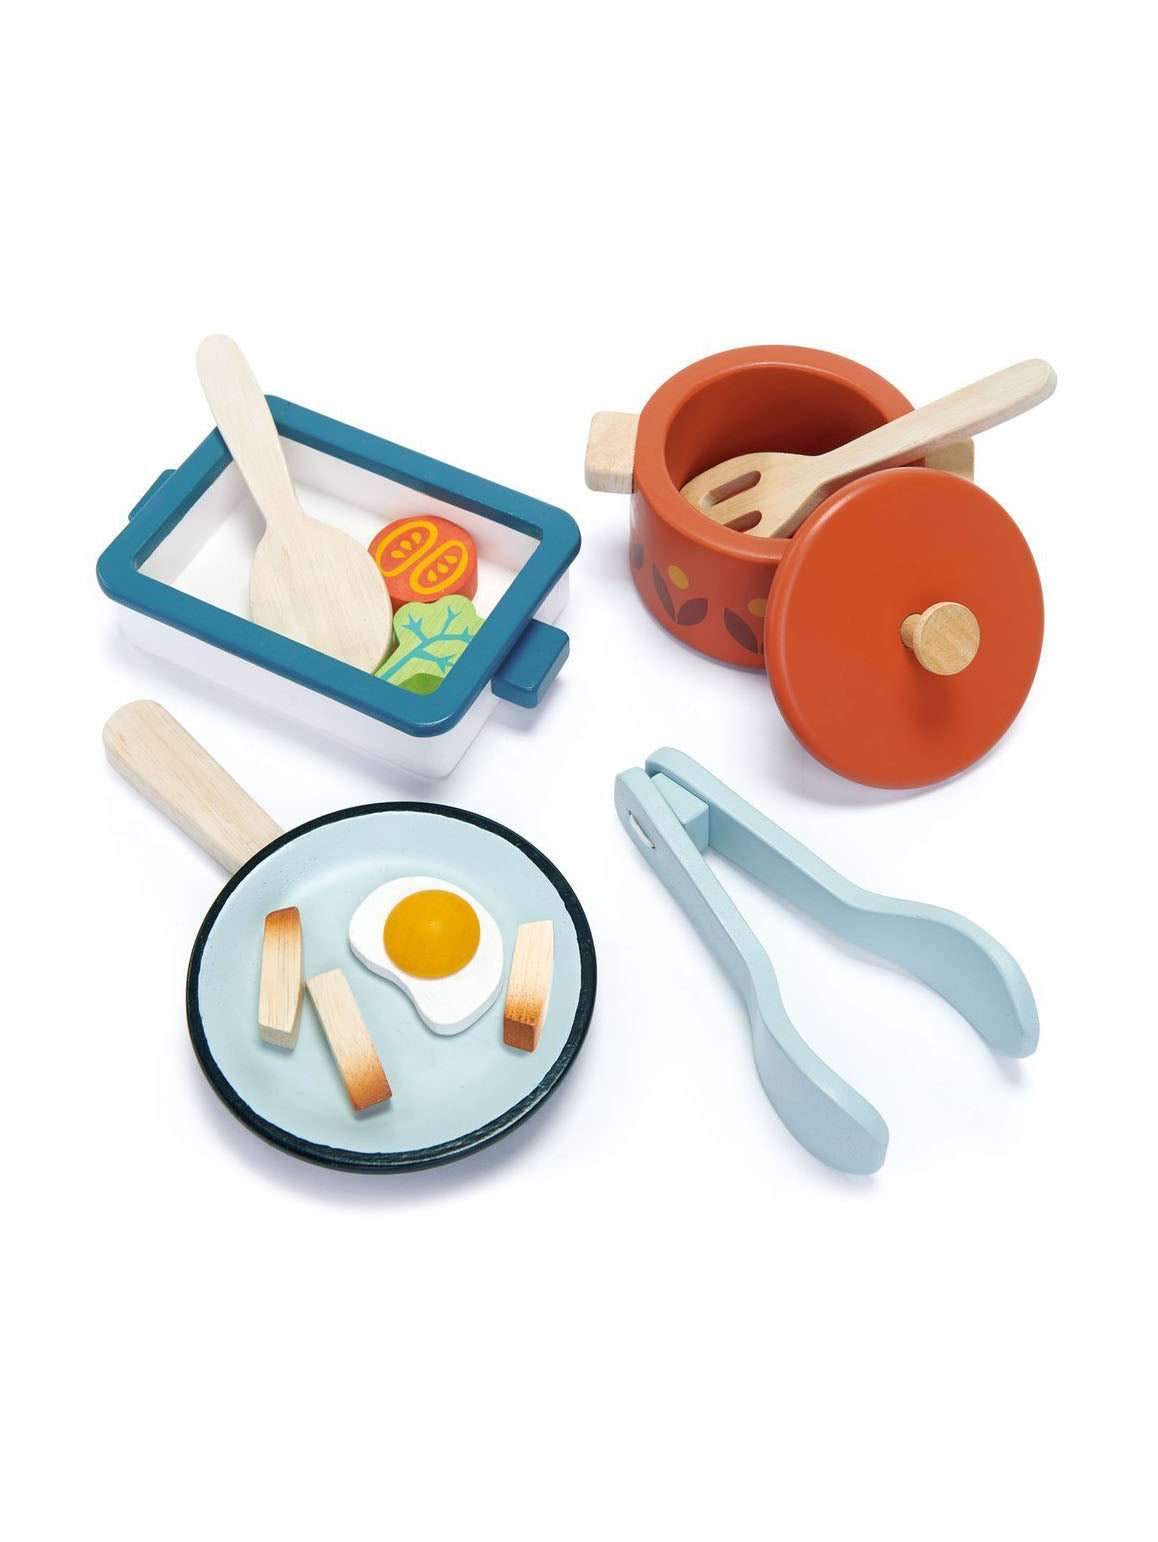 Tender Leaf Toys Pots and Pans Weston Table